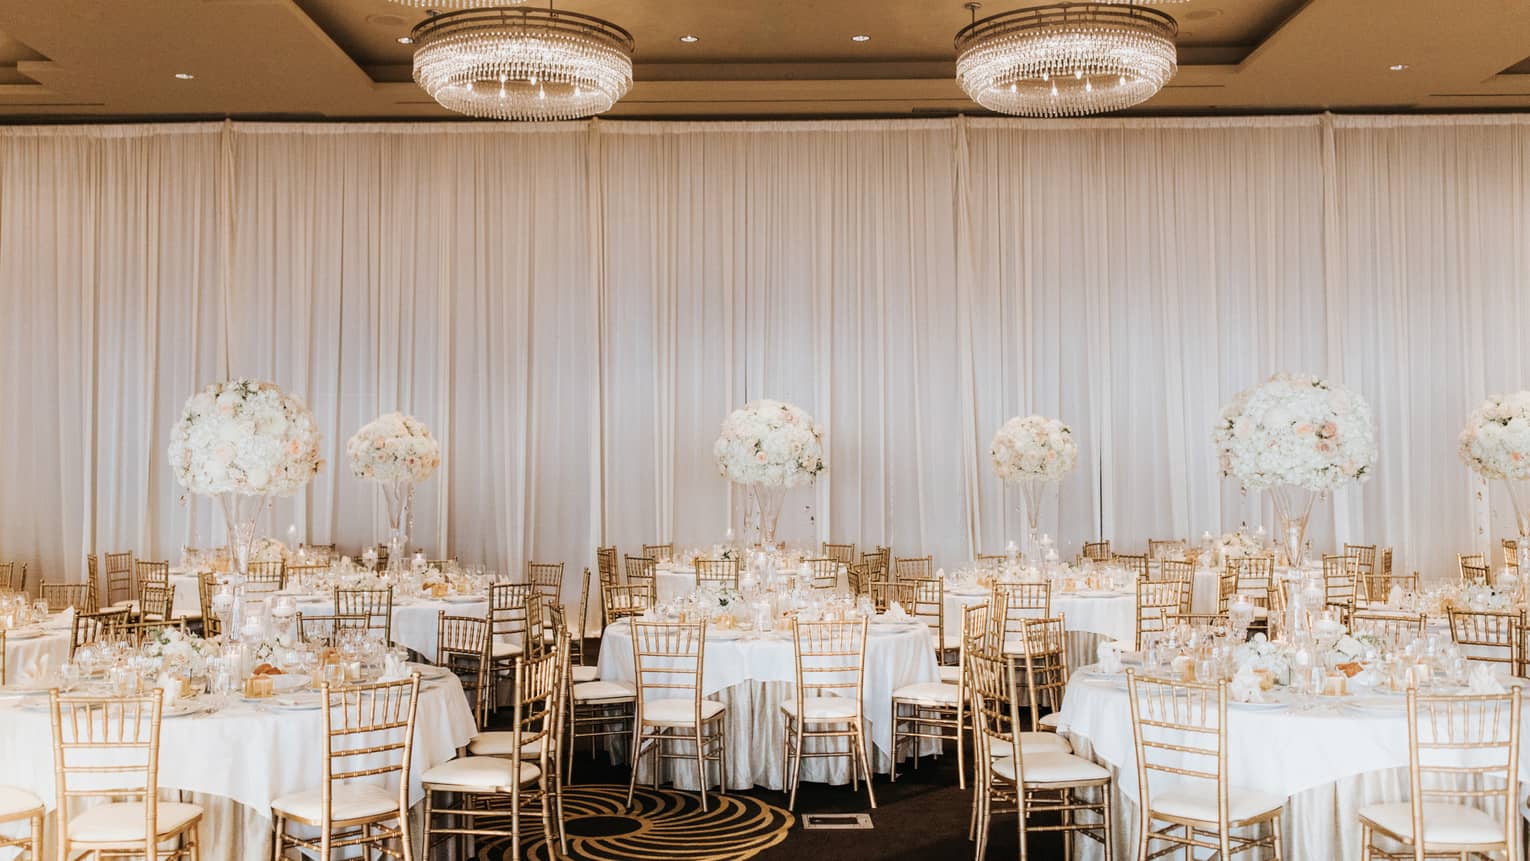 Elegant gold and white banquet dining tables in event room with small round chandeliers